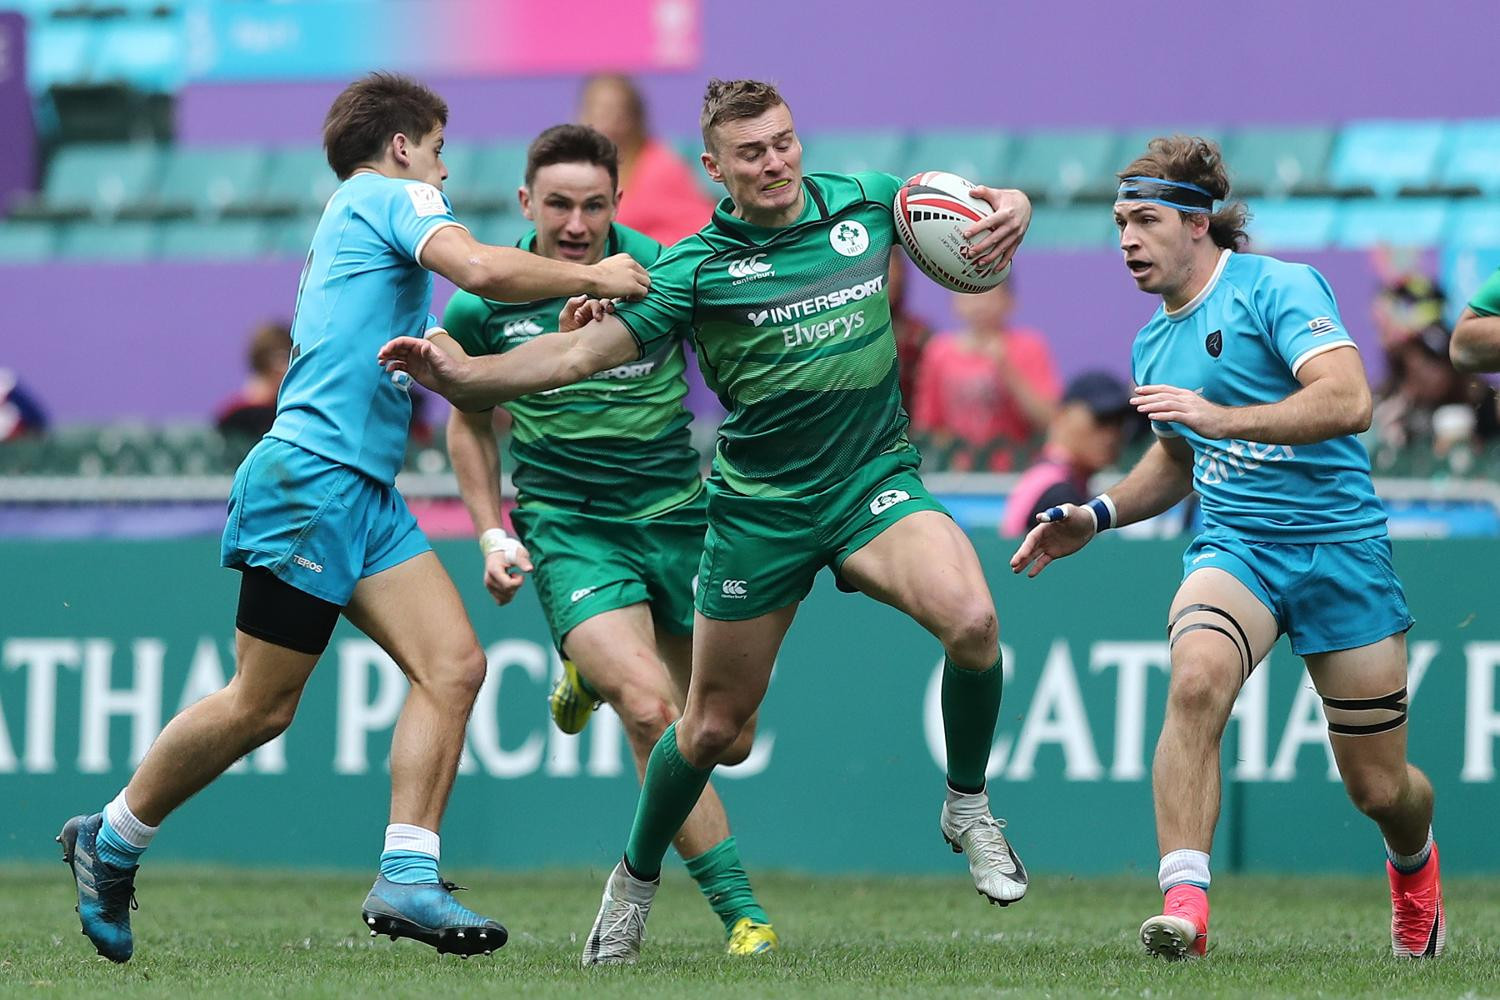  Ireland two wins from World Sevens Series promotion as Fiji and South Africa set pace in Hong Kong